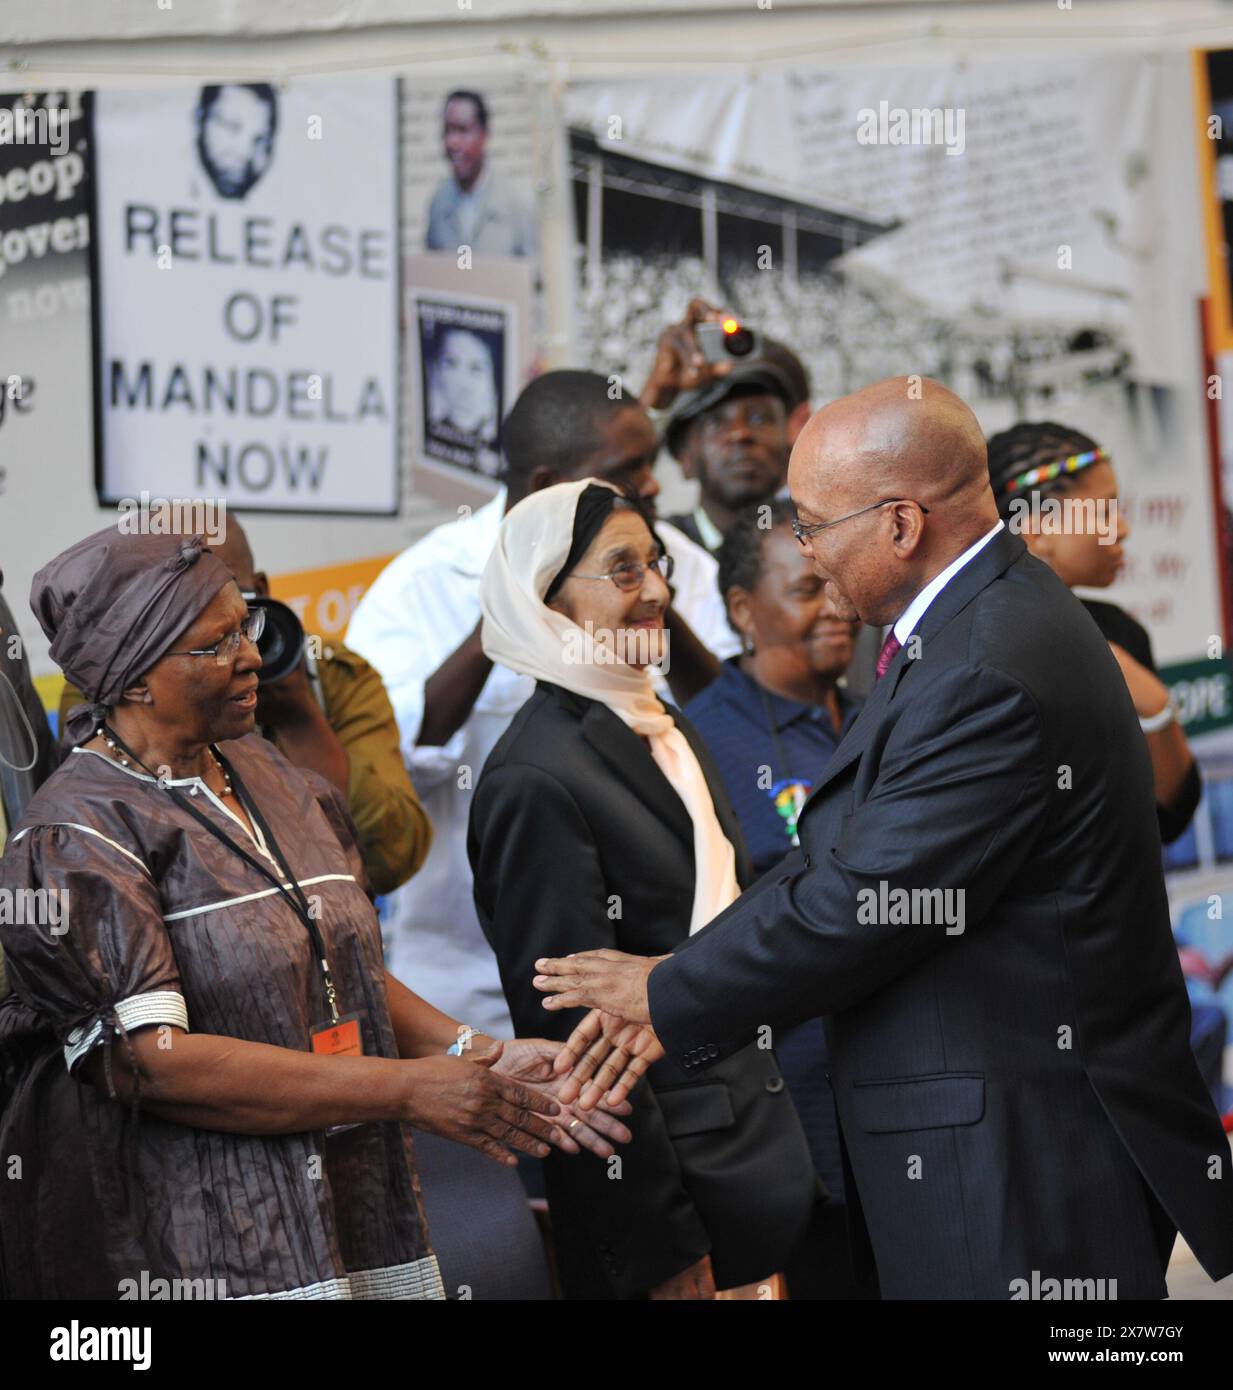 South Africa. Cape Town. 11 February 2010 Opening of the 2010 session of parliament by President Jacob Zuma. The occasion was themed to pay tribute to former President Nelson Mandela on the  20th anniversary of his release from prison in 1990.   President Zuma greets unidentified wellwishers as he walks up the red carpet.    Photo credit: Eric Miller / african.pictures Stock Photo